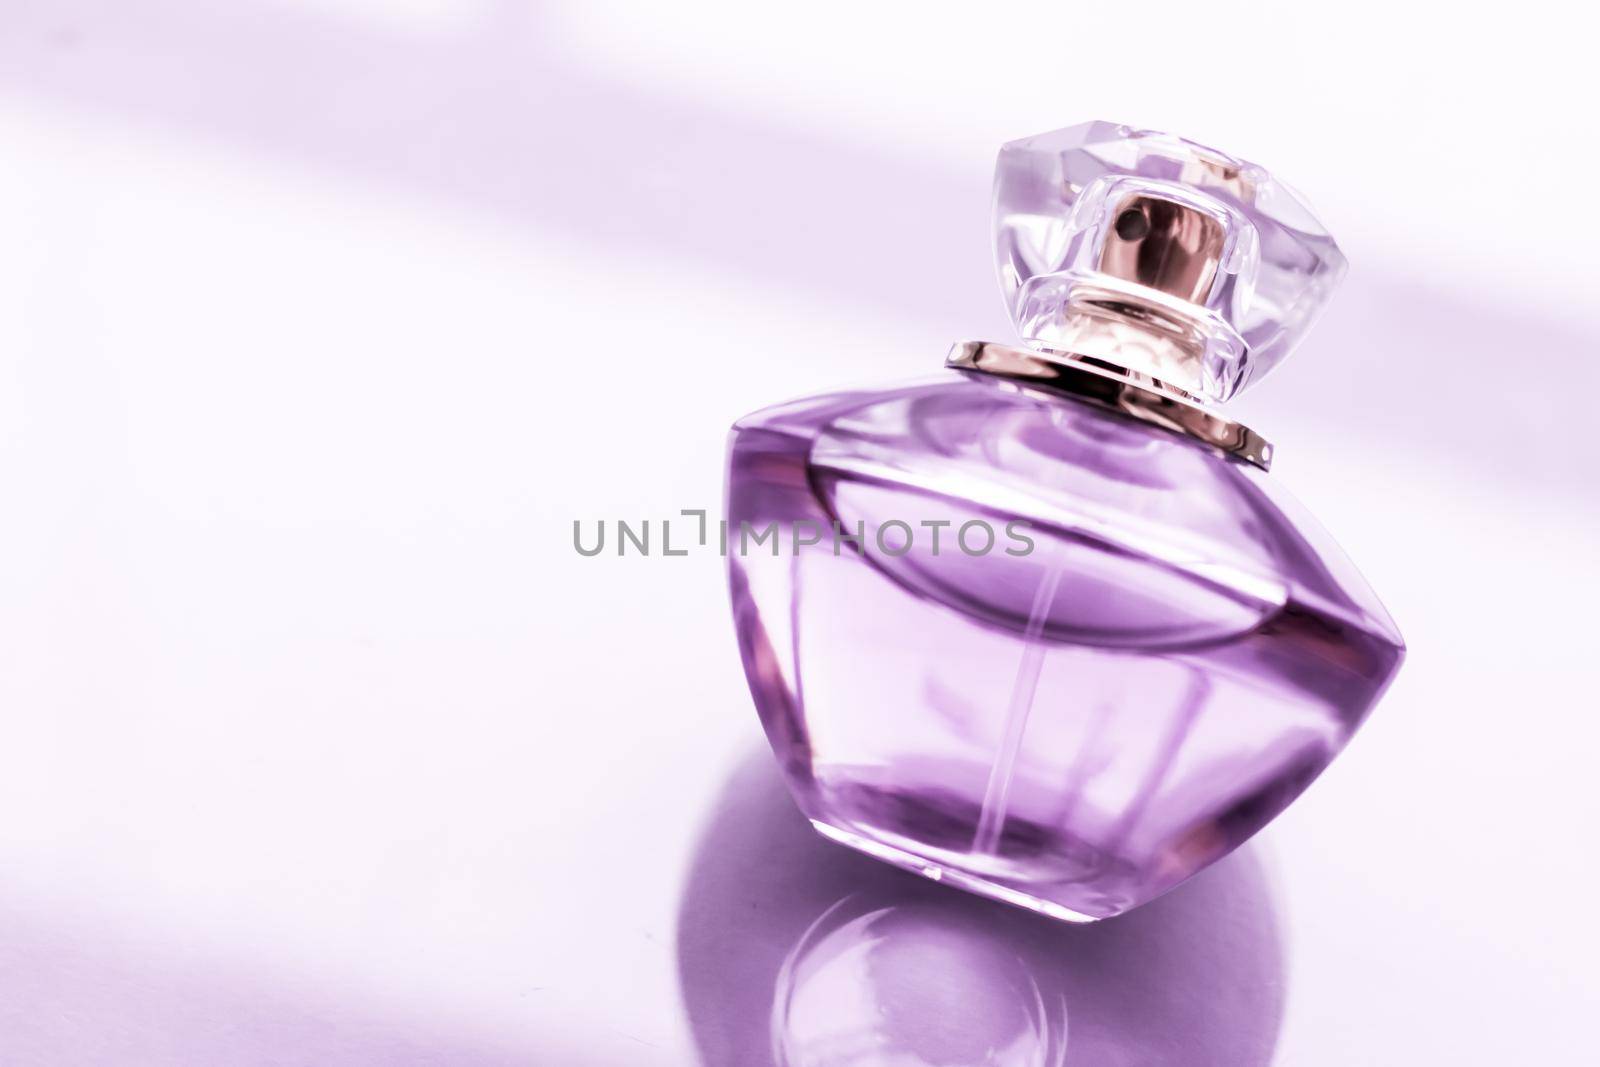 Perfumery, spa and branding concept - Purple perfume bottle on glossy background, sweet floral scent, glamour fragrance and eau de parfum as holiday gift and luxury beauty cosmetics brand design